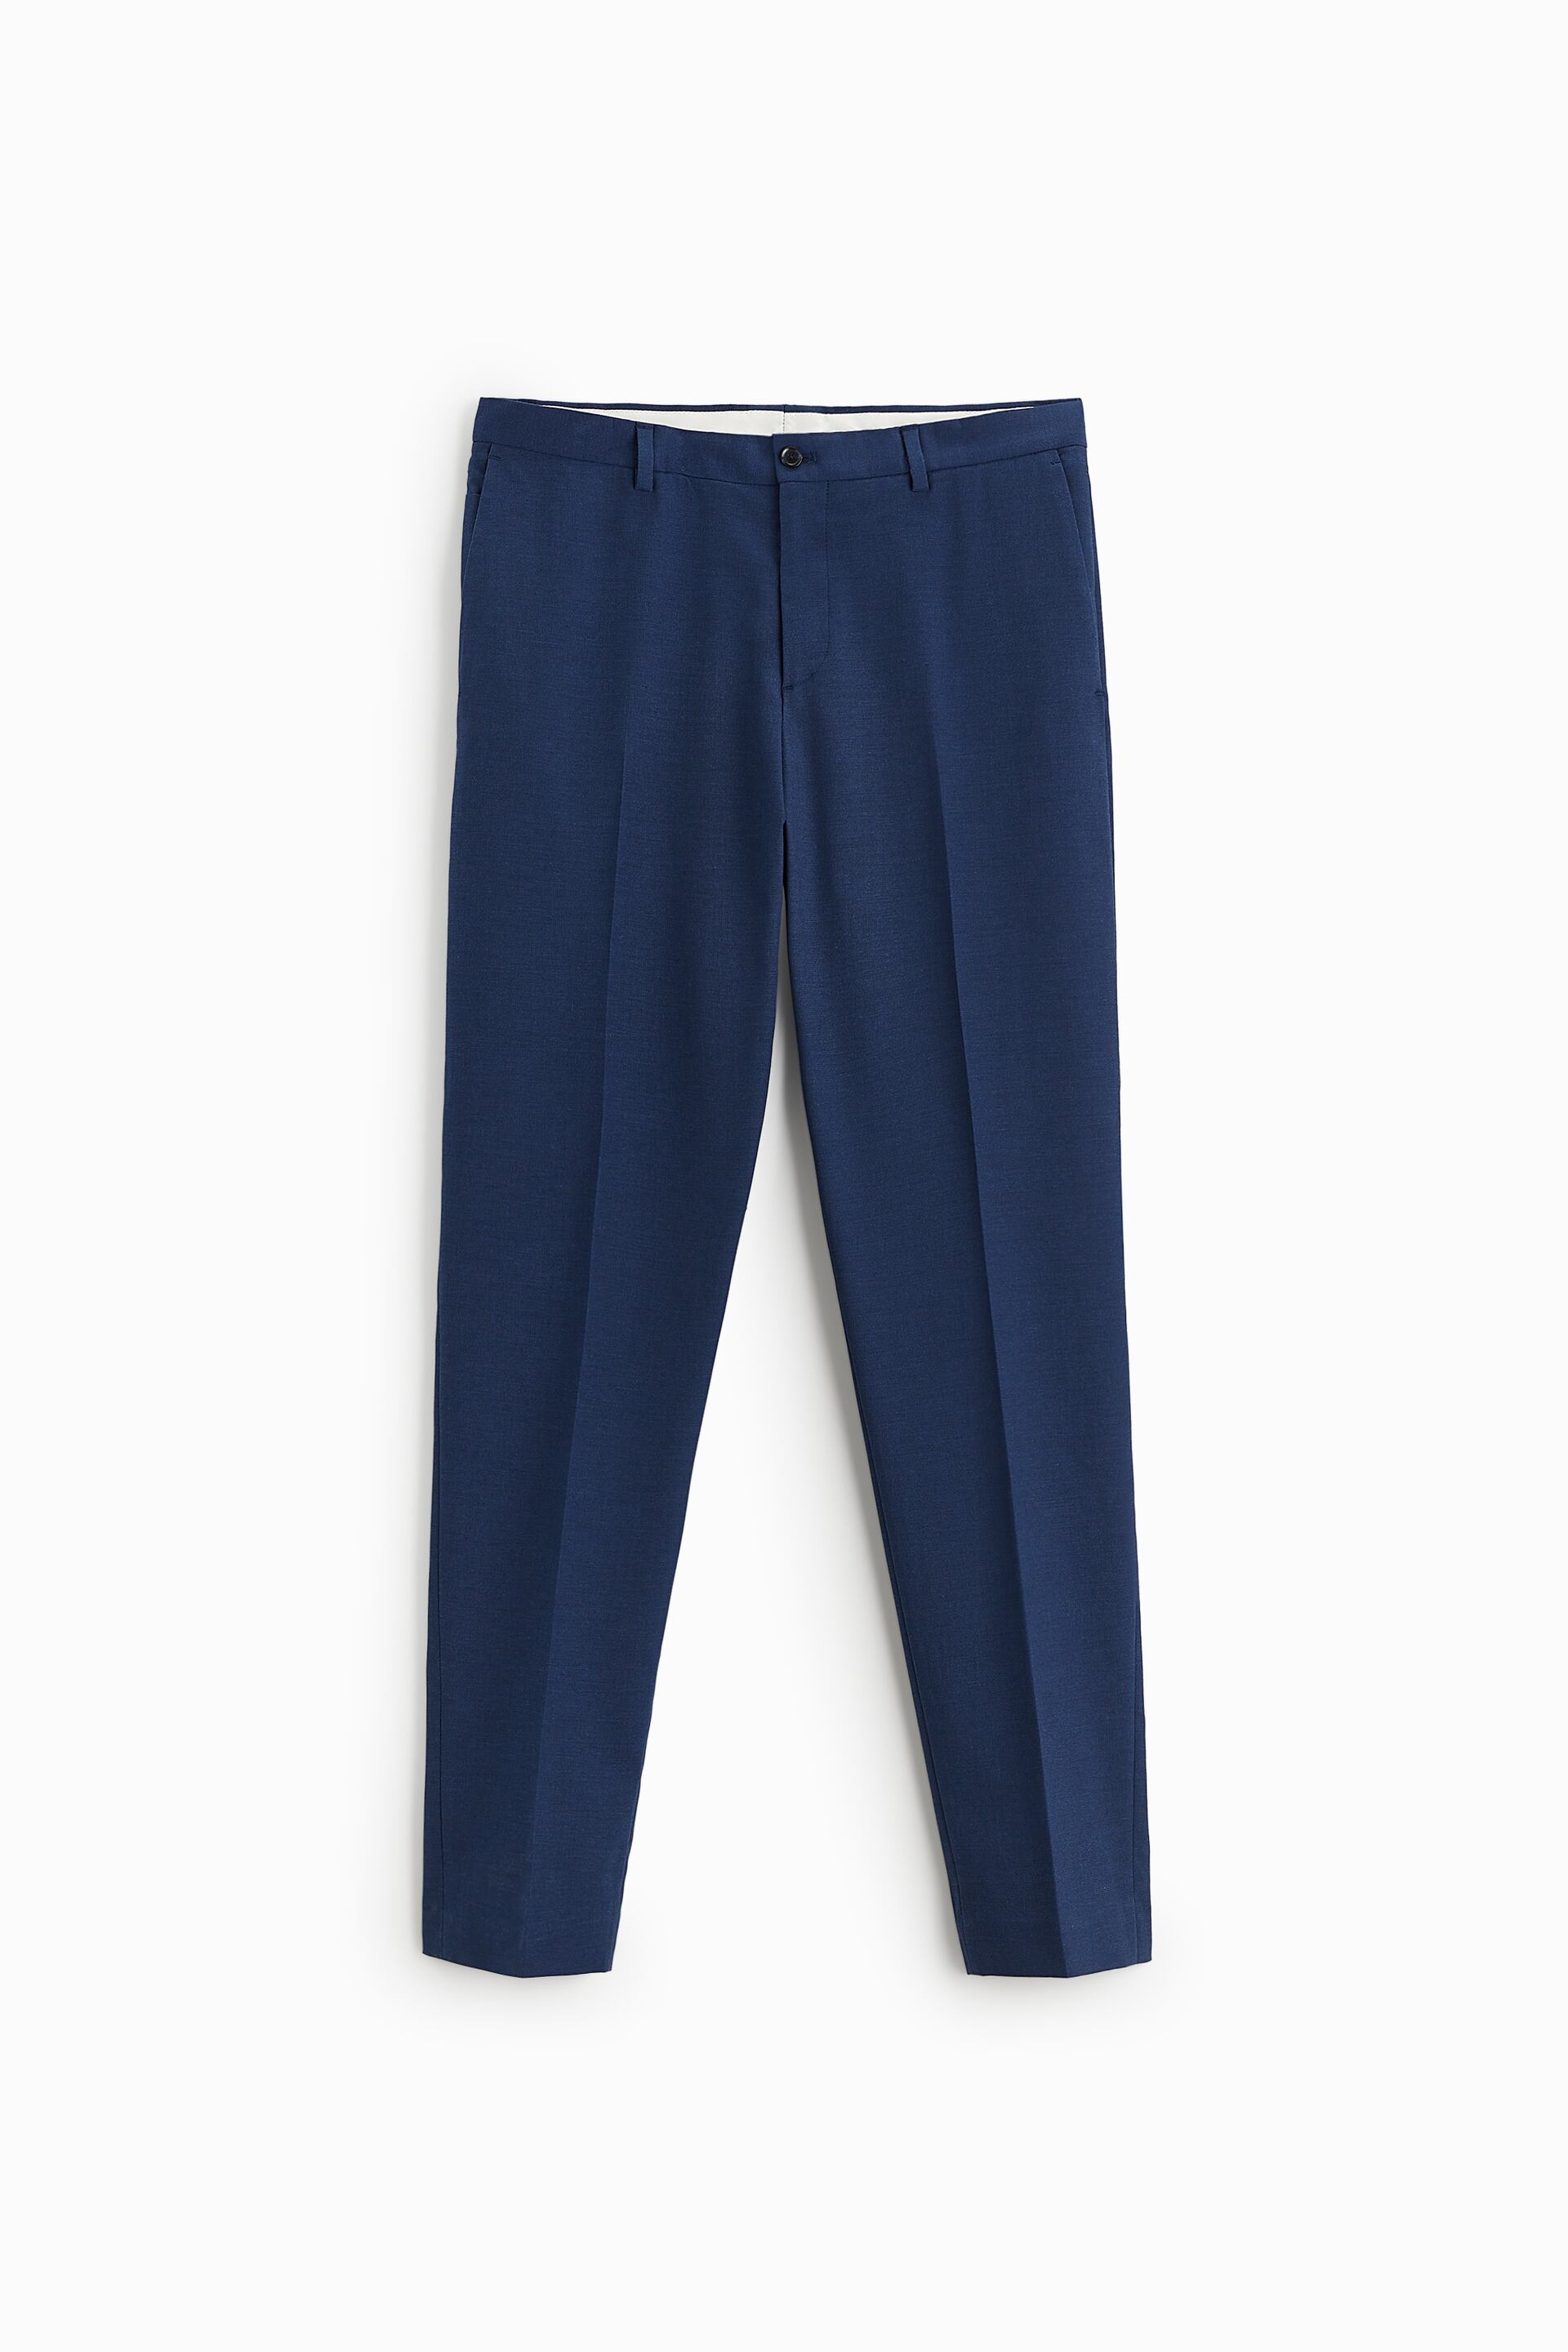 TEXTURED PANTS - Blue | United States